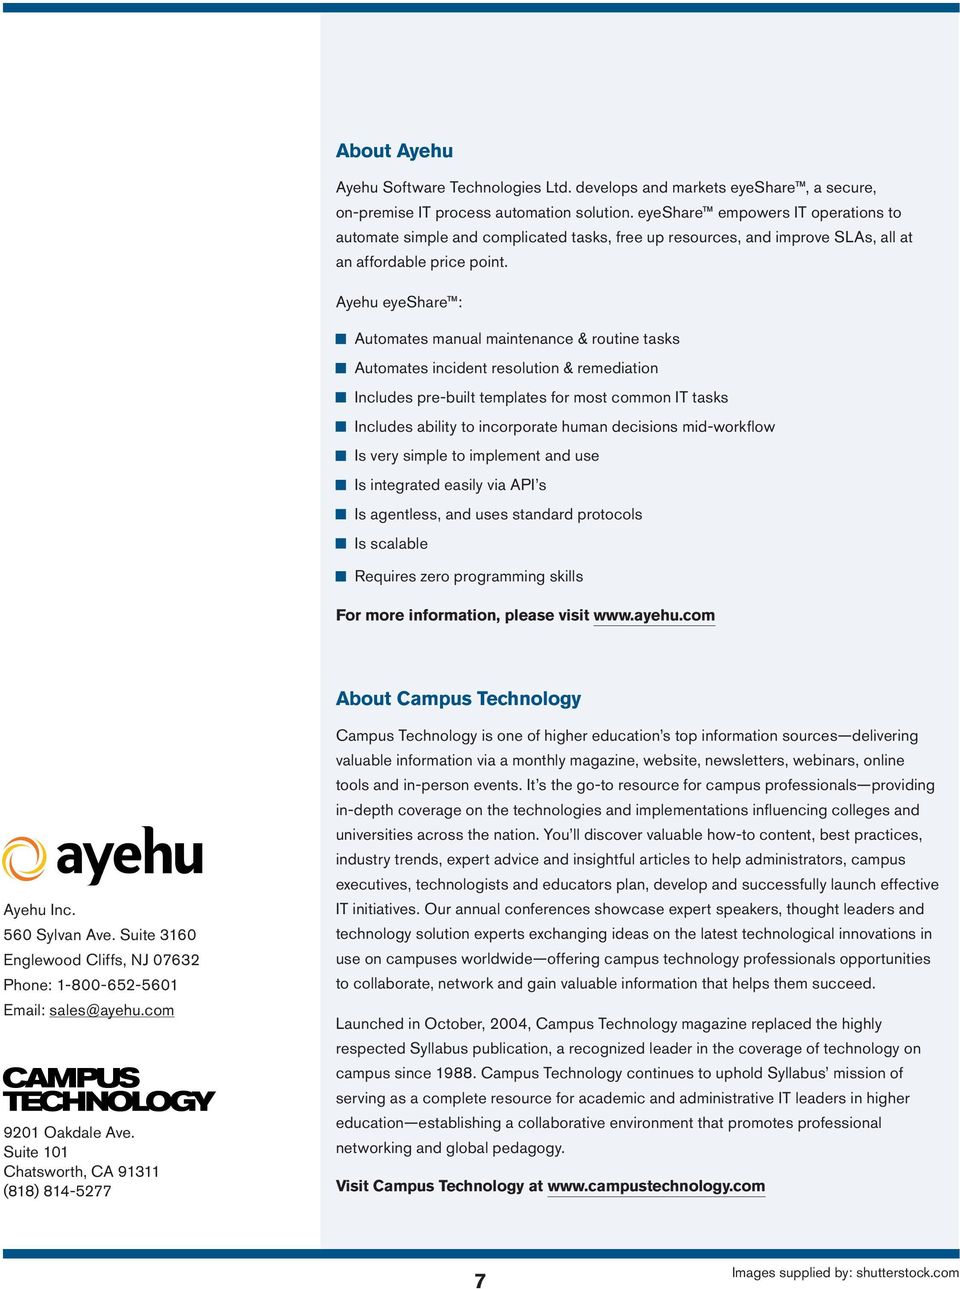 Ayehu eyeshare : Automates manual maintenance & routine tasks Automates incident resolution & remediation Includes pre-built templates for most common IT tasks Includes ability to incorporate human